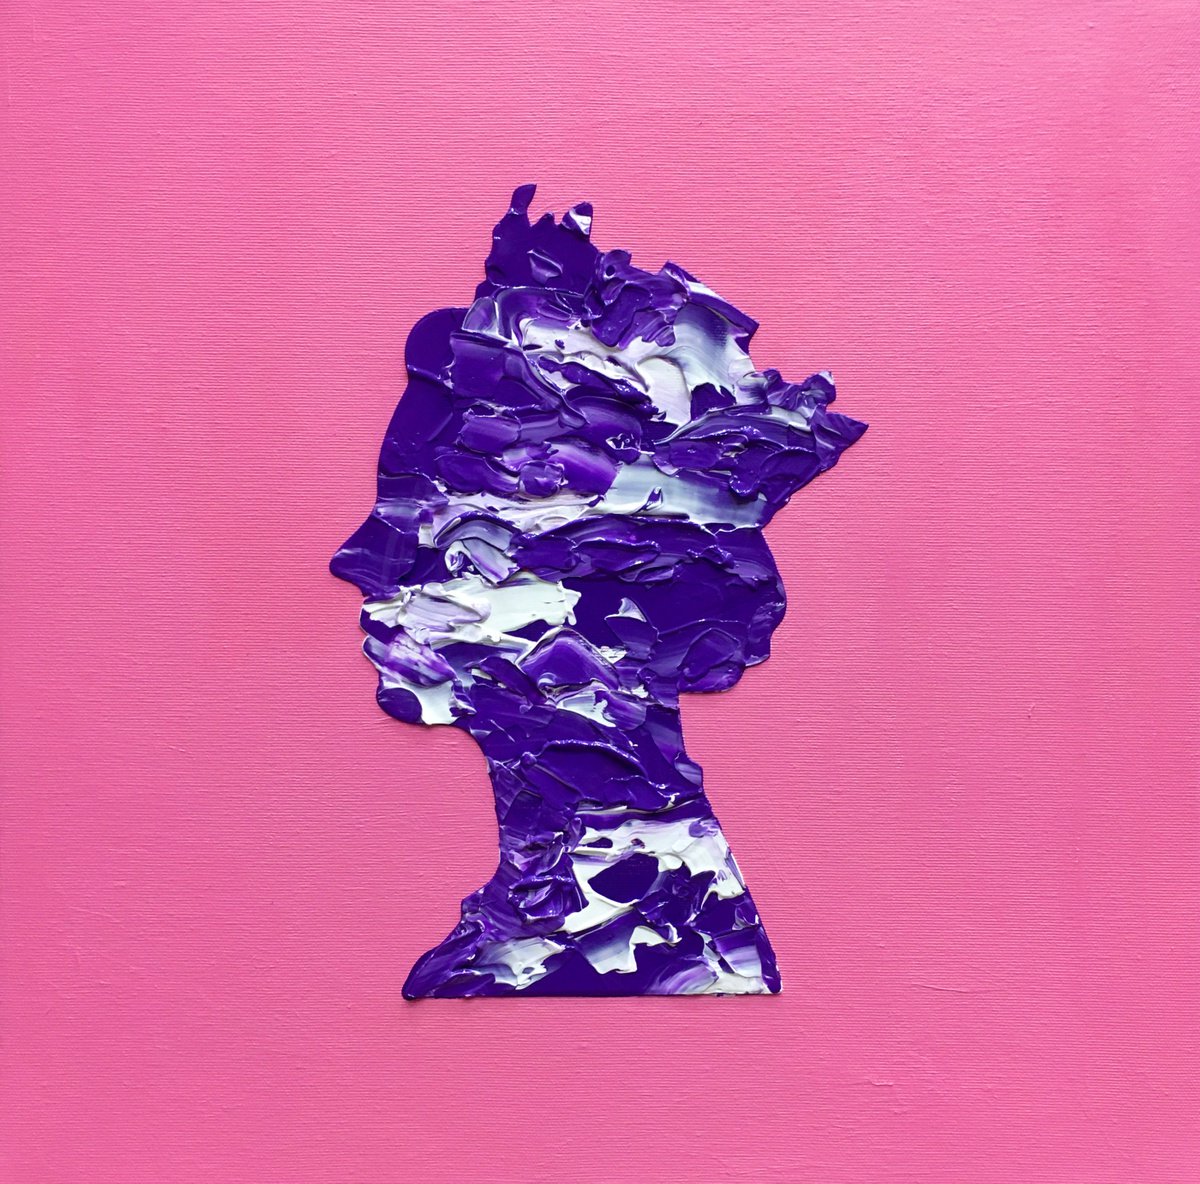 Queen #70 on pink , marble pattern PAINTING INSPIRED BY QUEEN ELIZABETH PORTRAIT by Olga Koval